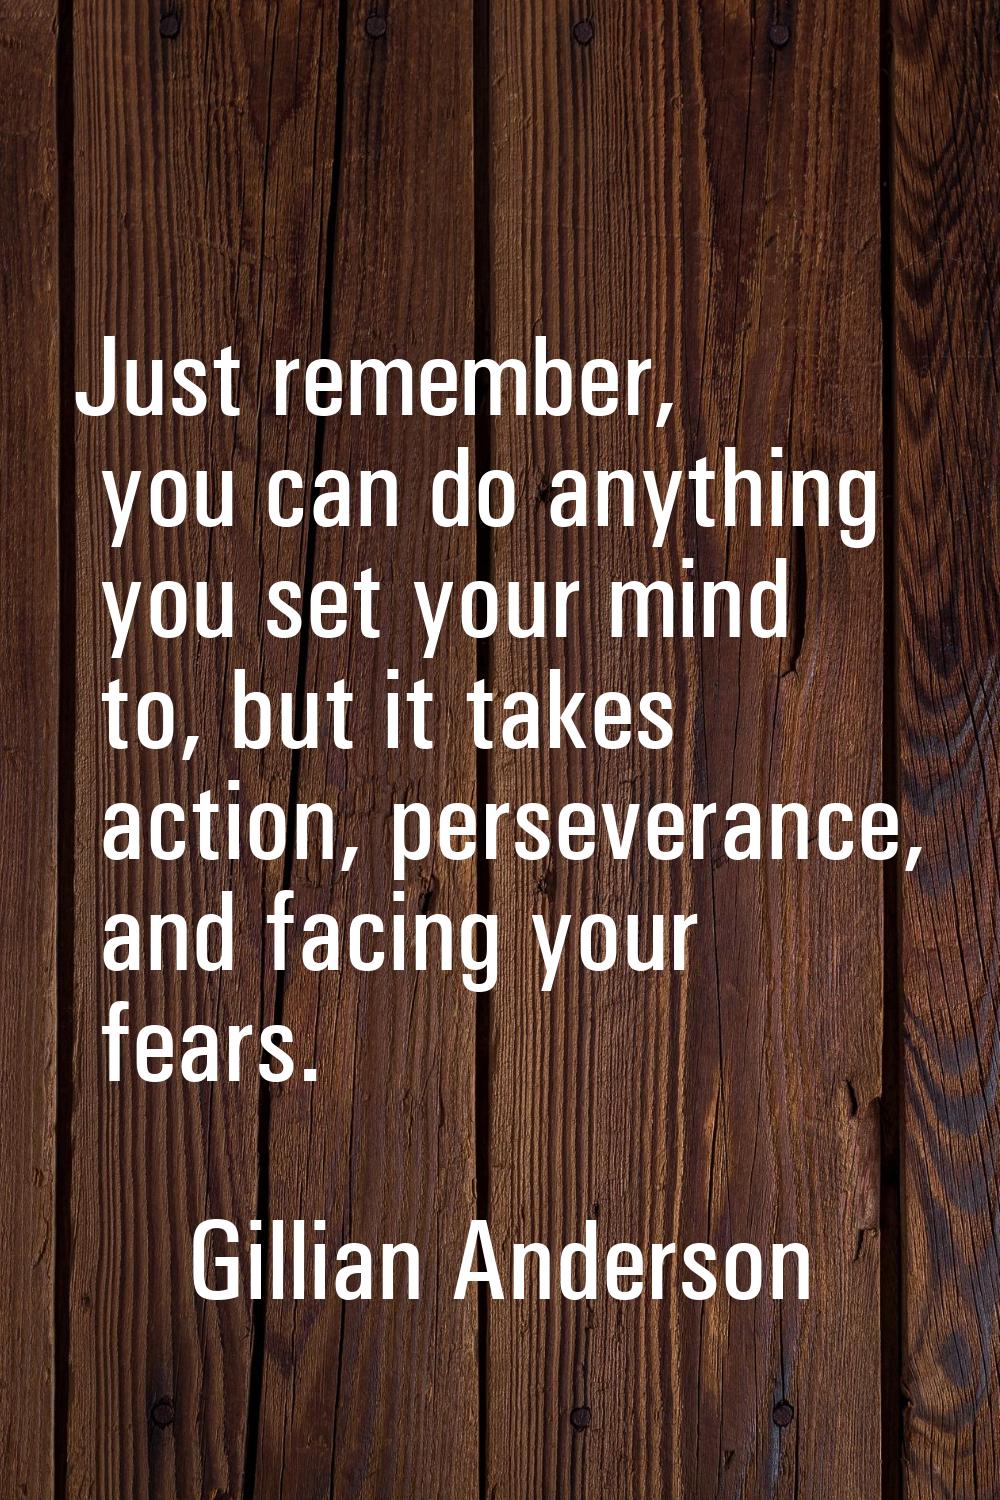 Just remember, you can do anything you set your mind to, but it takes action, perseverance, and fac